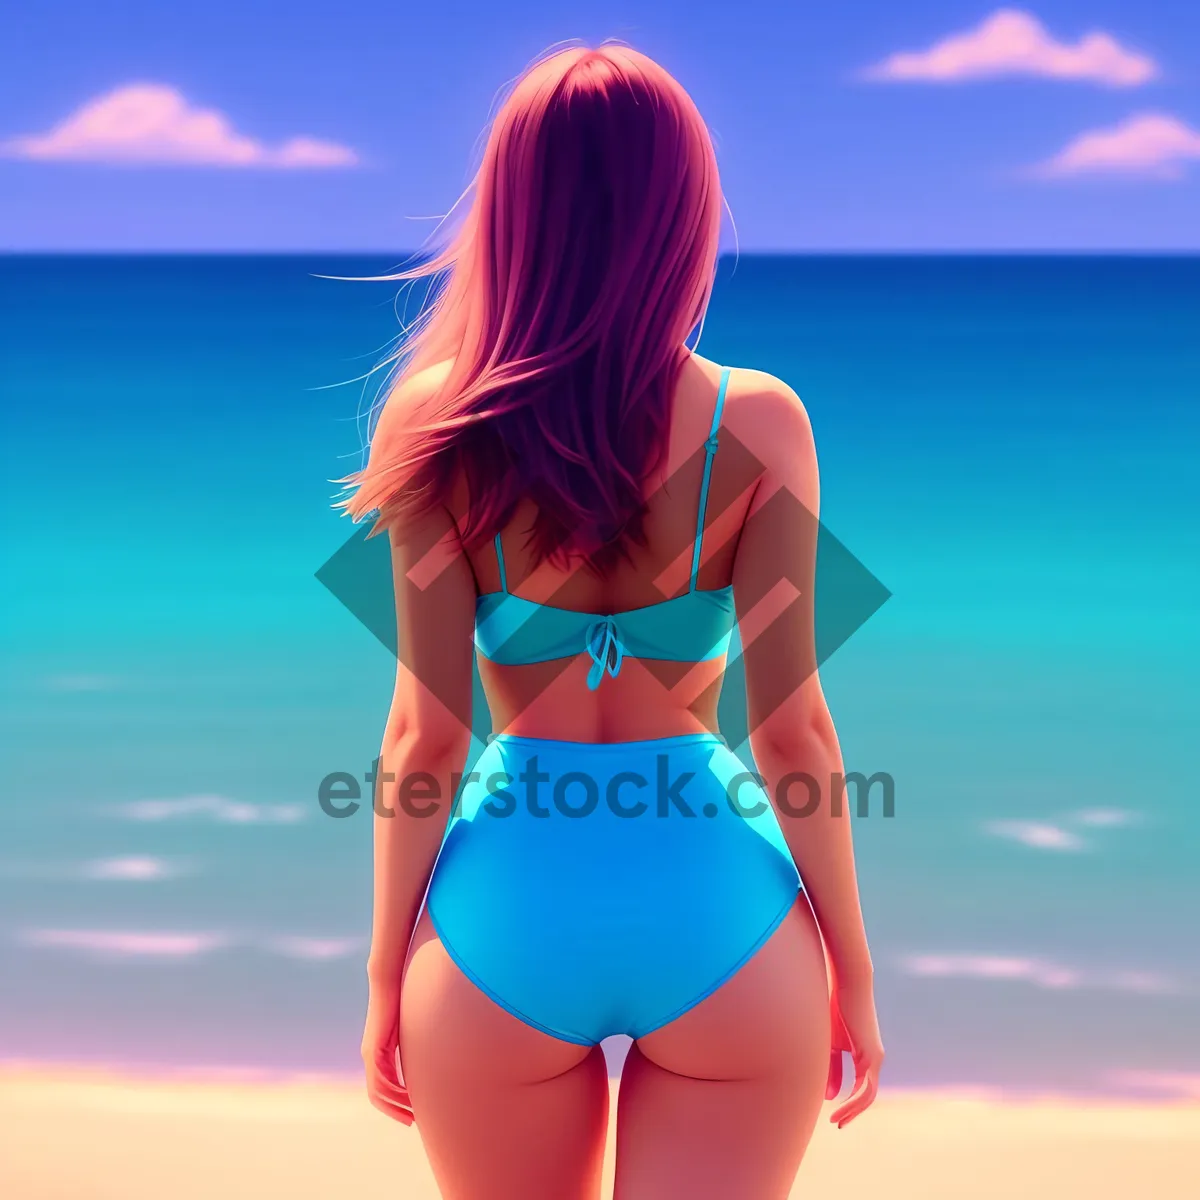 Picture of Smiling Beach Babe: Fashionable Bikini Model by the Sea